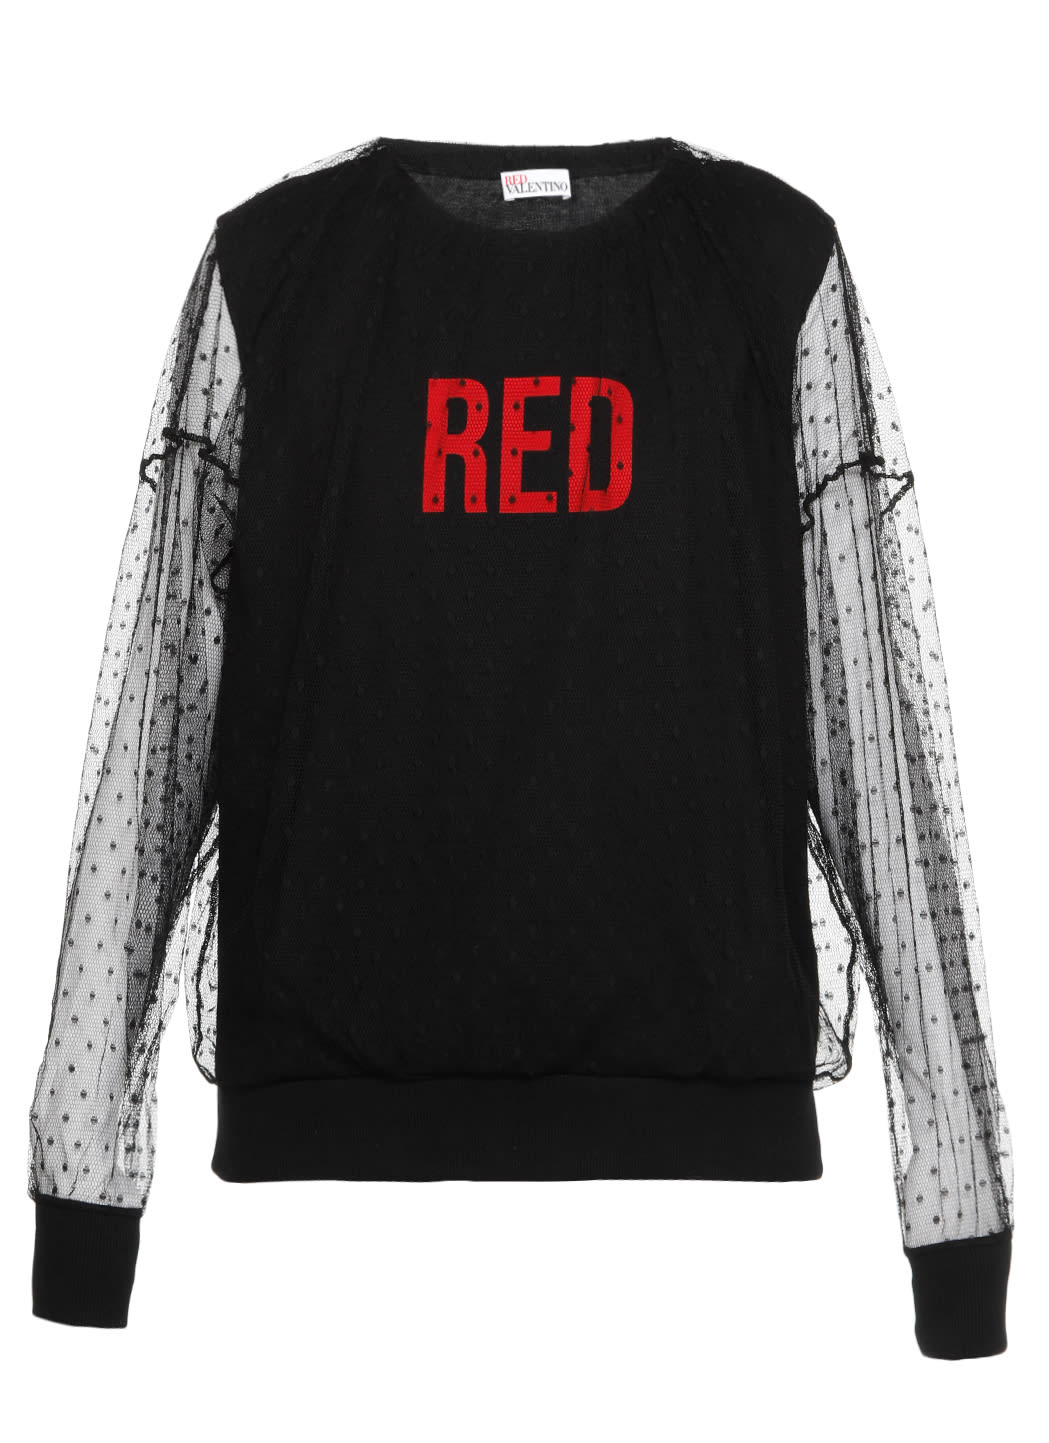 RED Valentino Sweatshirt With Red Print And Lace